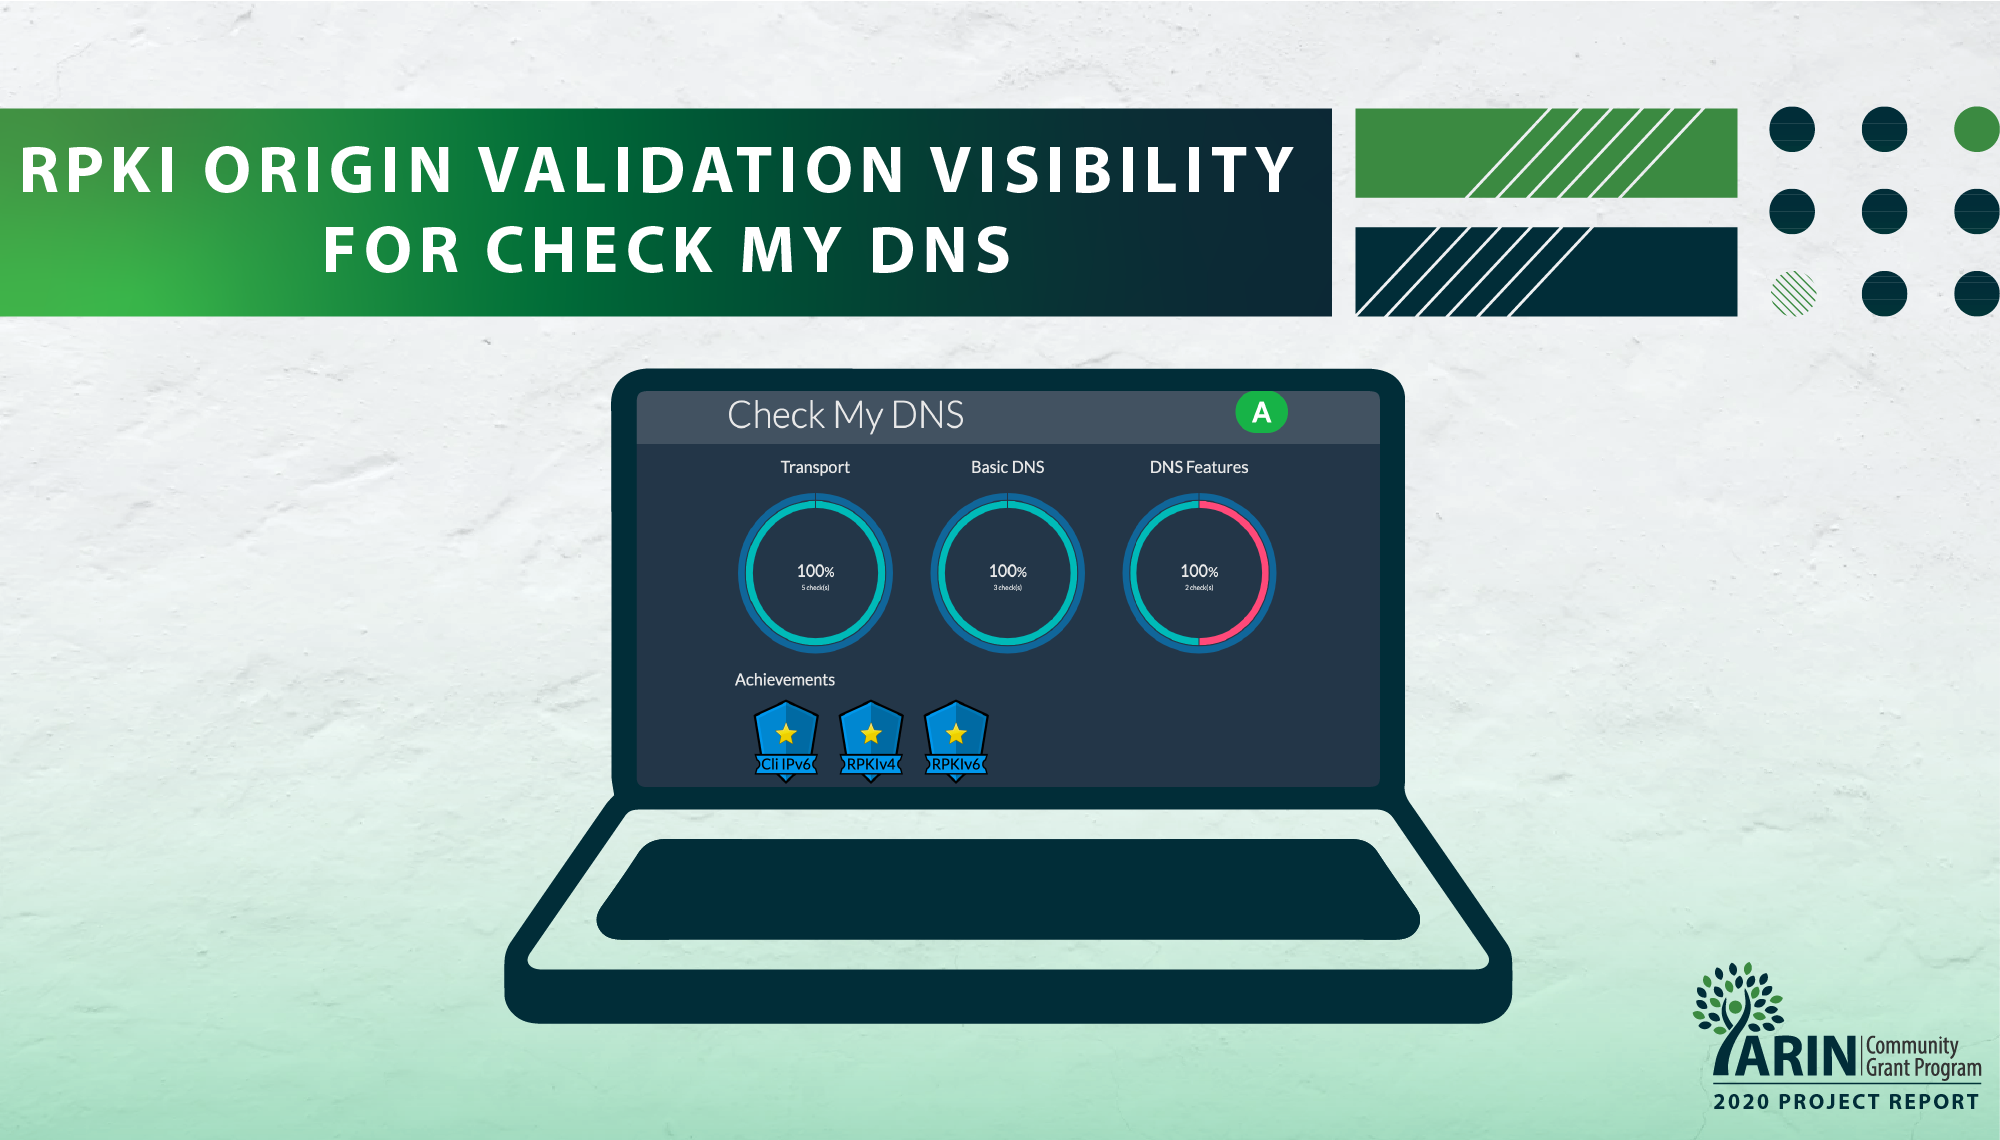 RPKI Origin Validation Visibility for Check My DNS